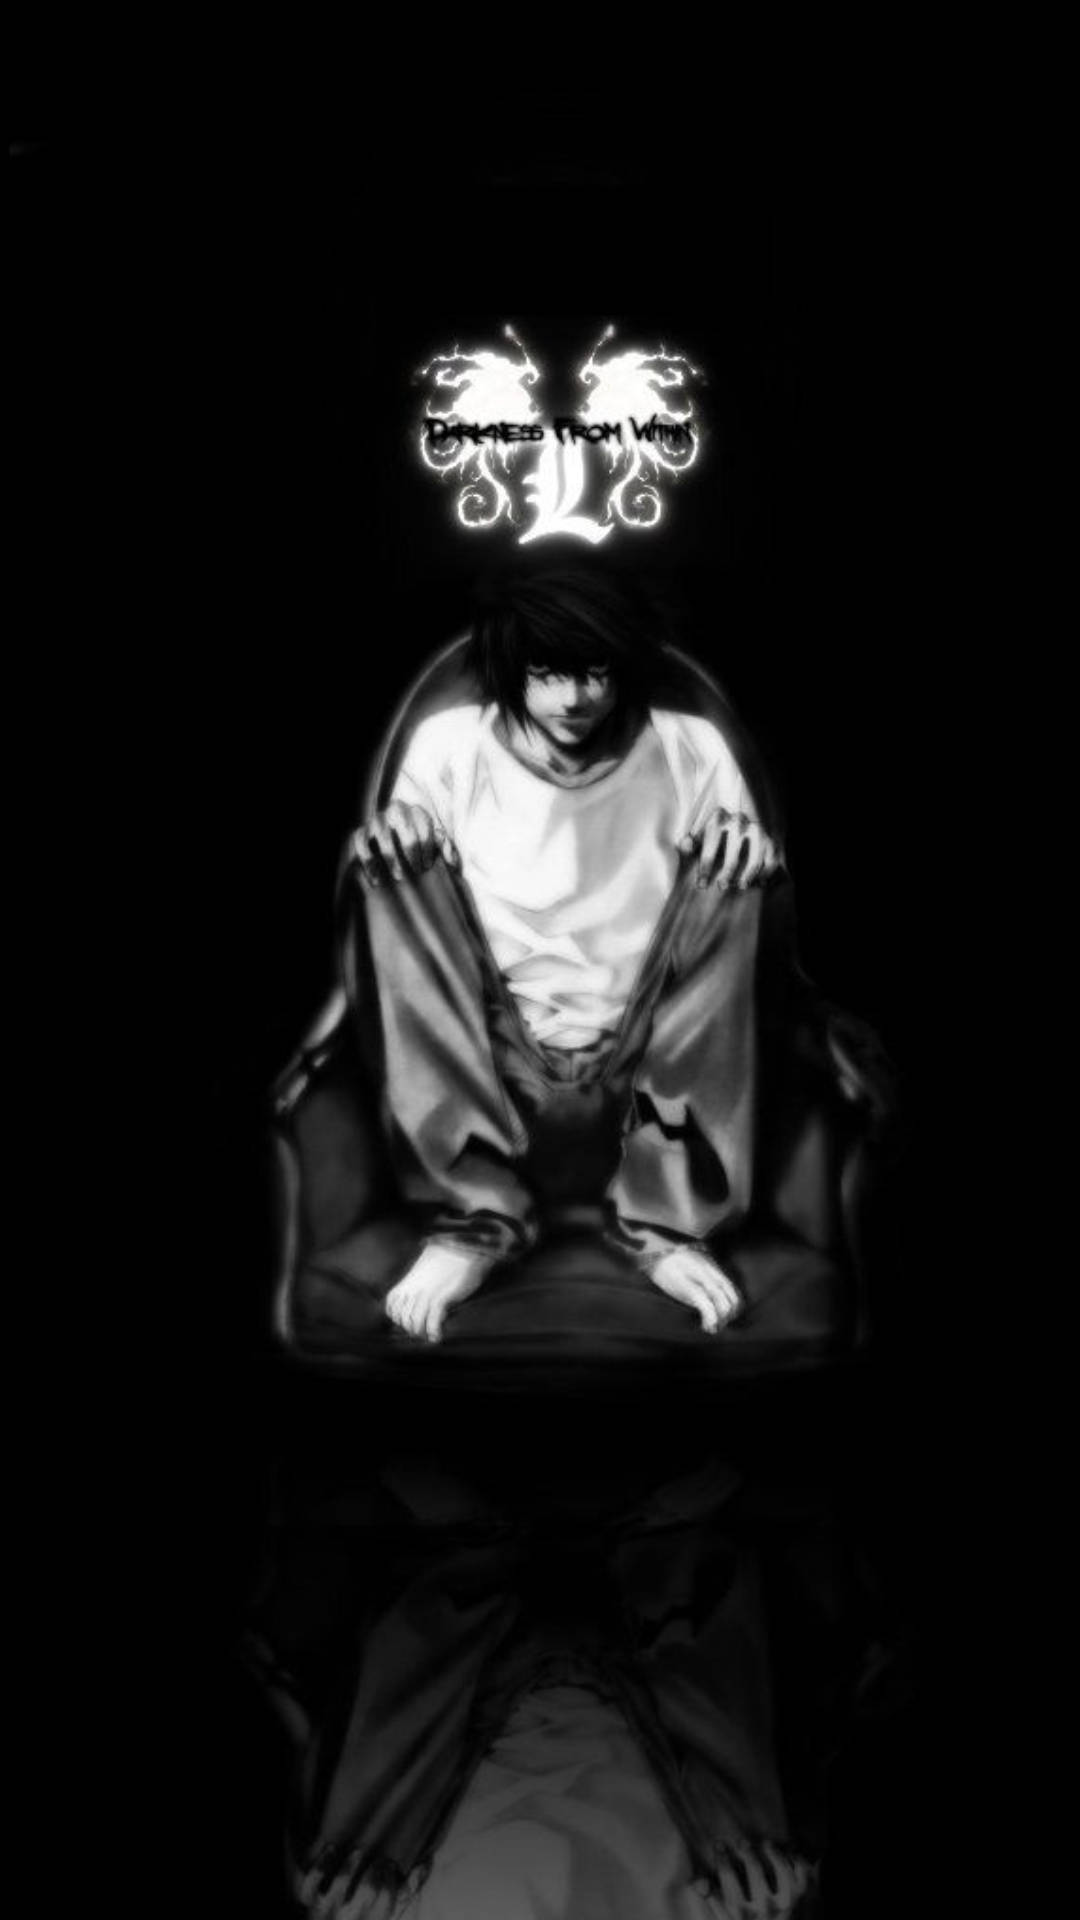 Lawliet Sitting On Chair Death Note Iphone Background